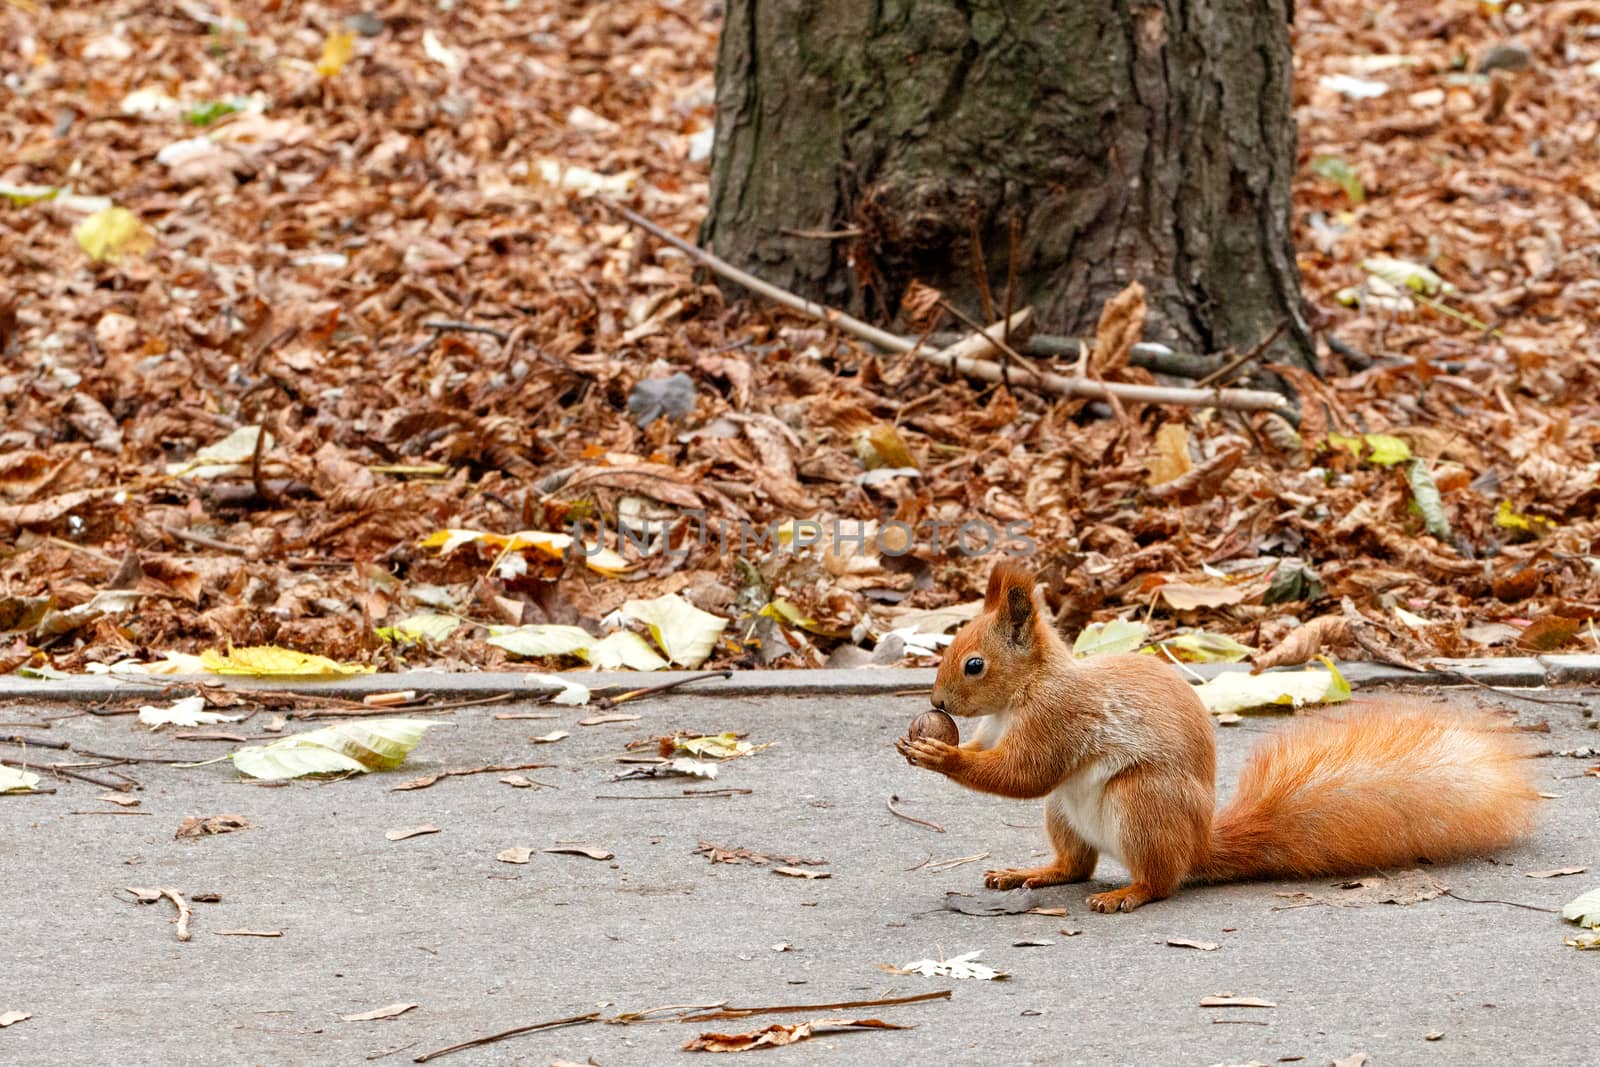 A fluffy orange squirrel found a walnut that it holds in its paws on an autumn asphalt path in an autumn park. Close-up image with copy space.